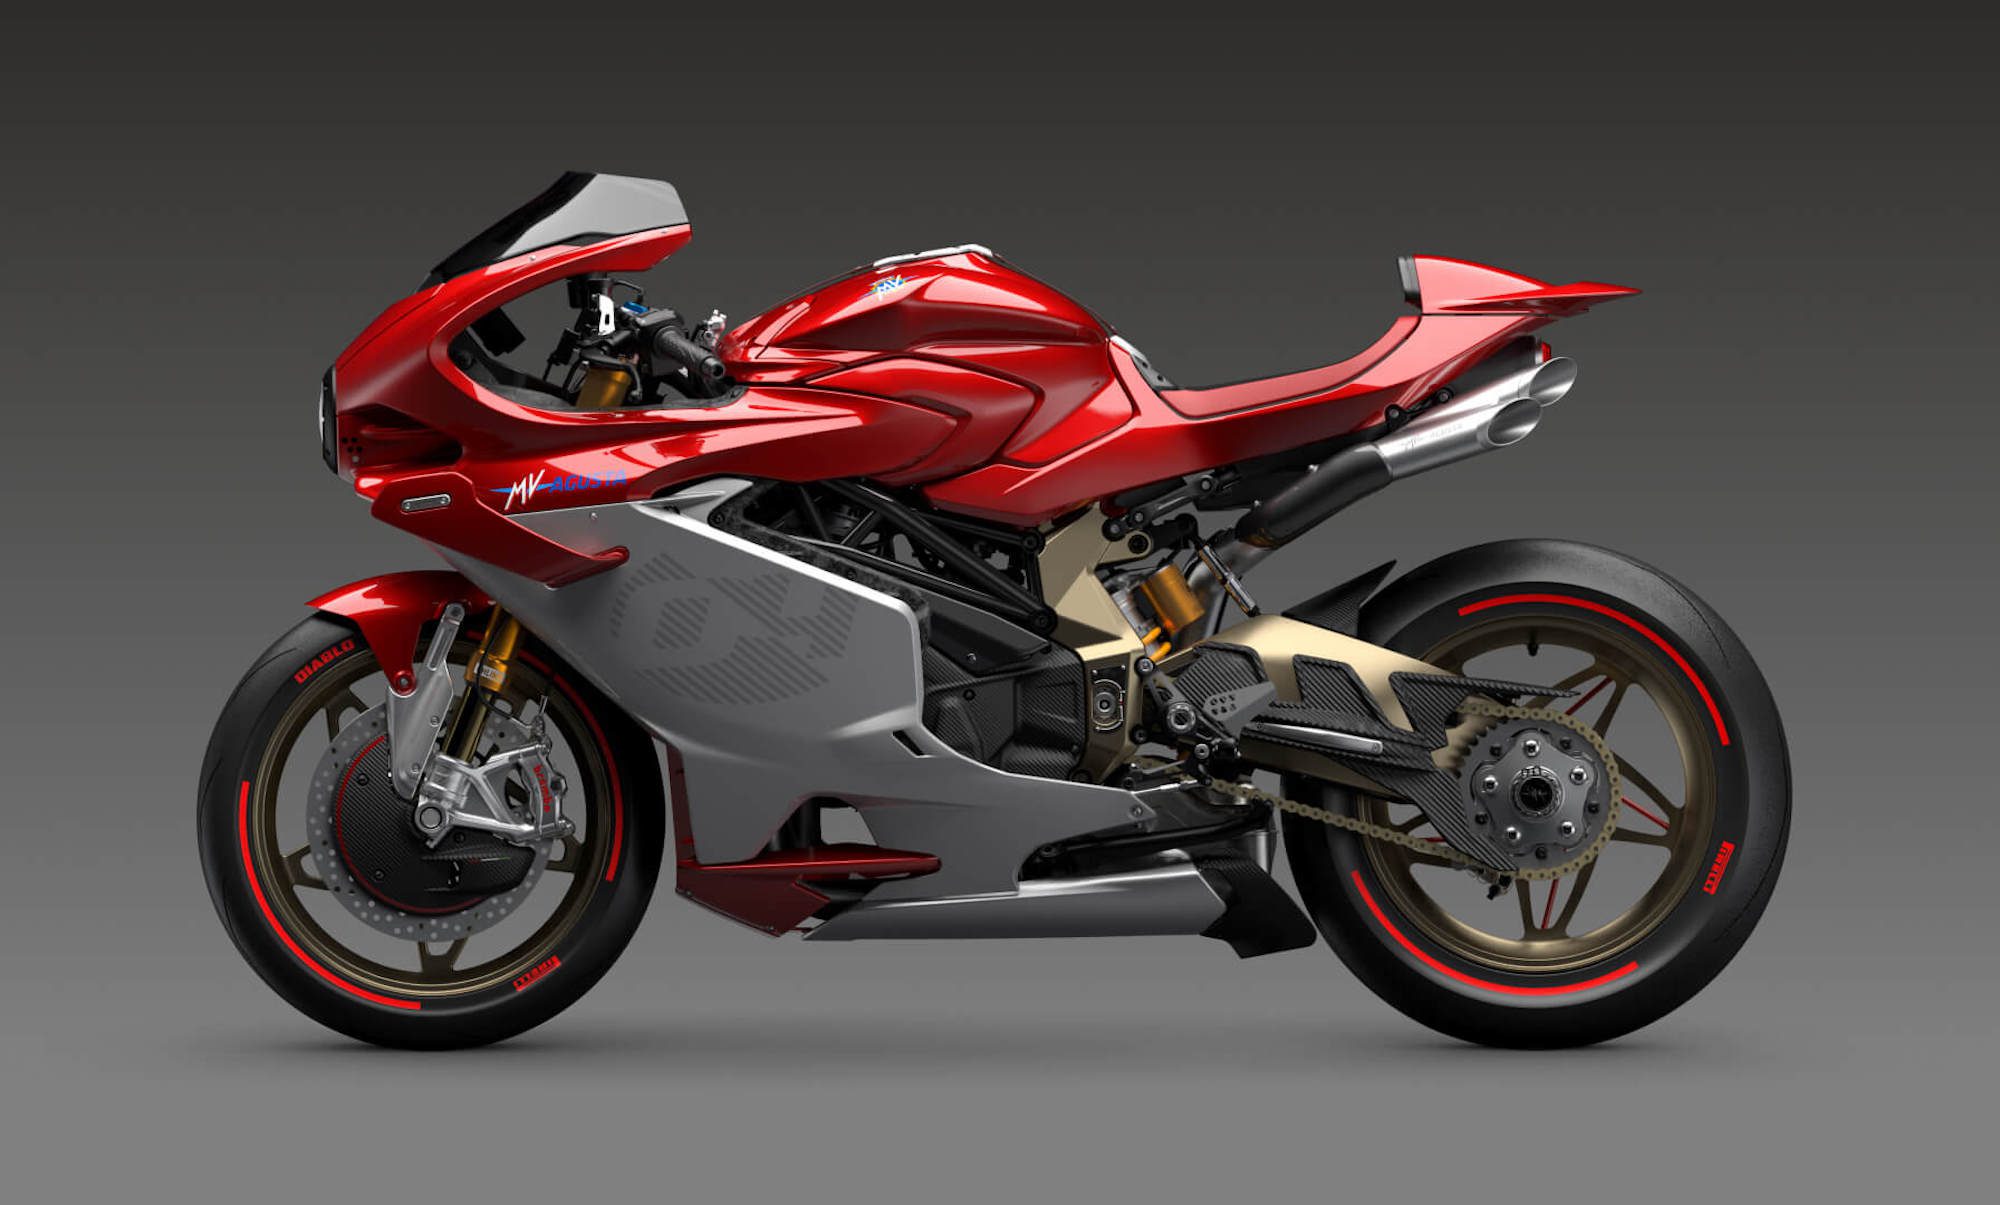 Meet MV Agusta's new limited-edition model: The Superveloce 1000 Serie Oro. Media sourced from MV Agusta. 